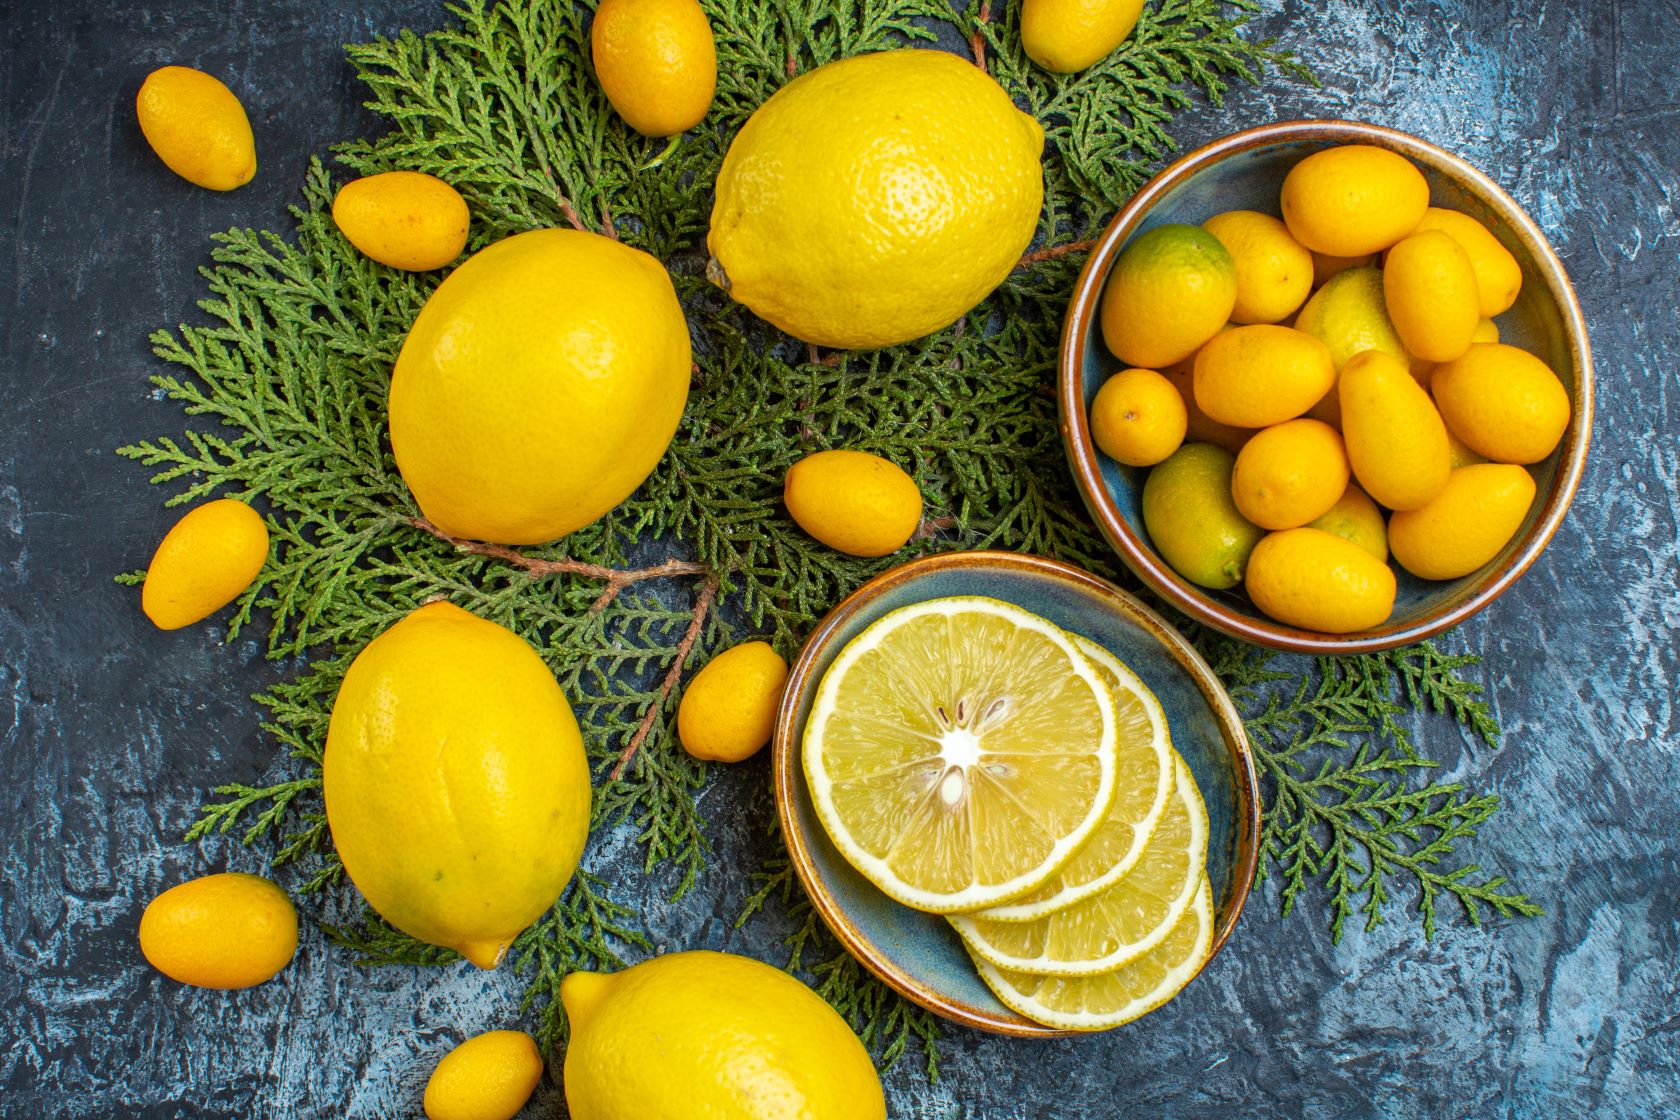 Lemons and other citrus fruits have limonene.